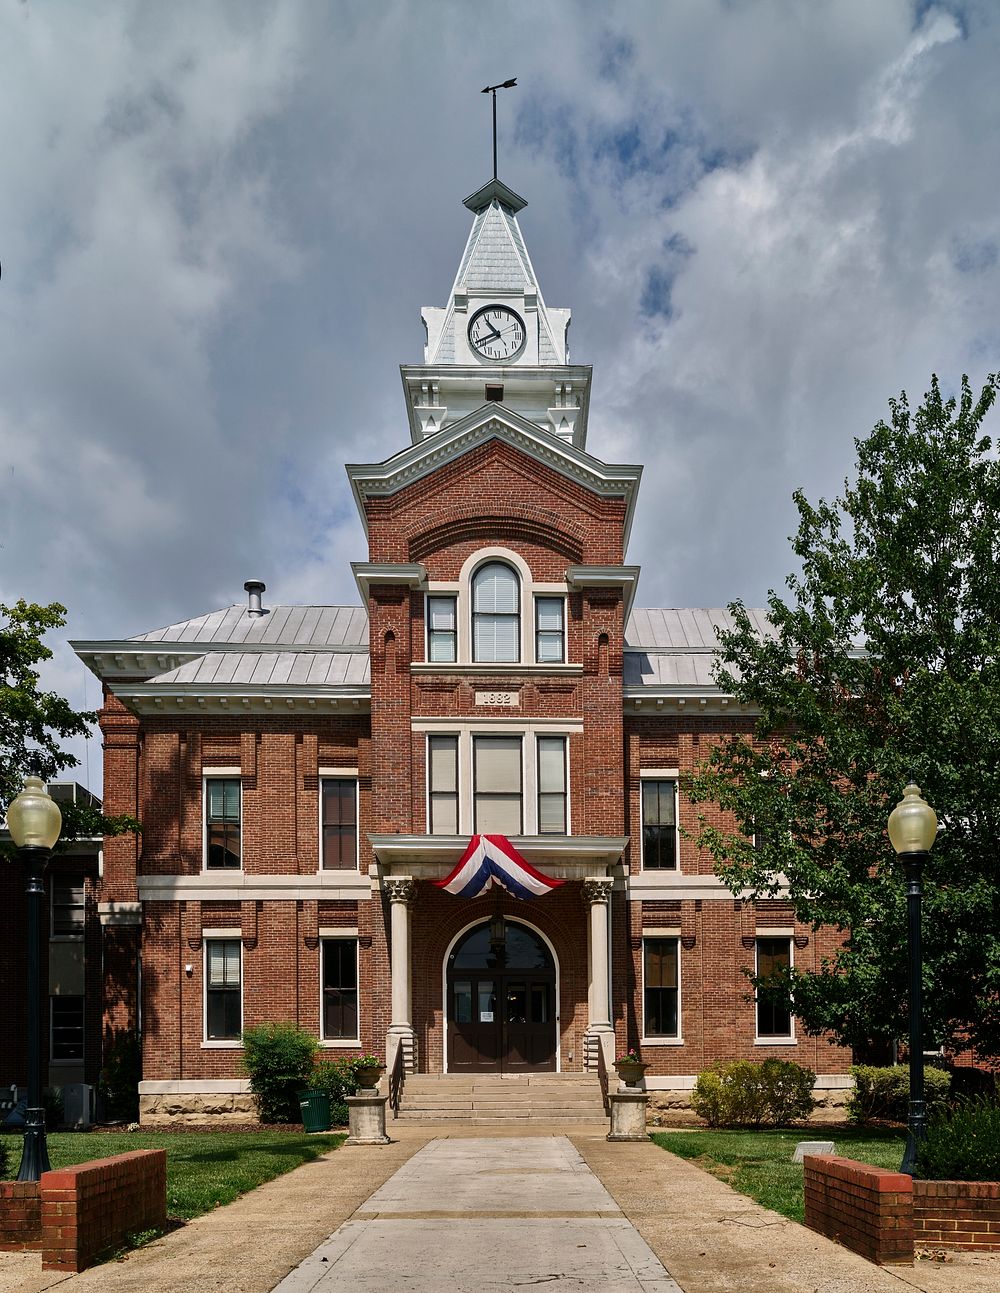                         The old Simpson County Courthouse in Franklin, Kentucky, completed in 1882                        